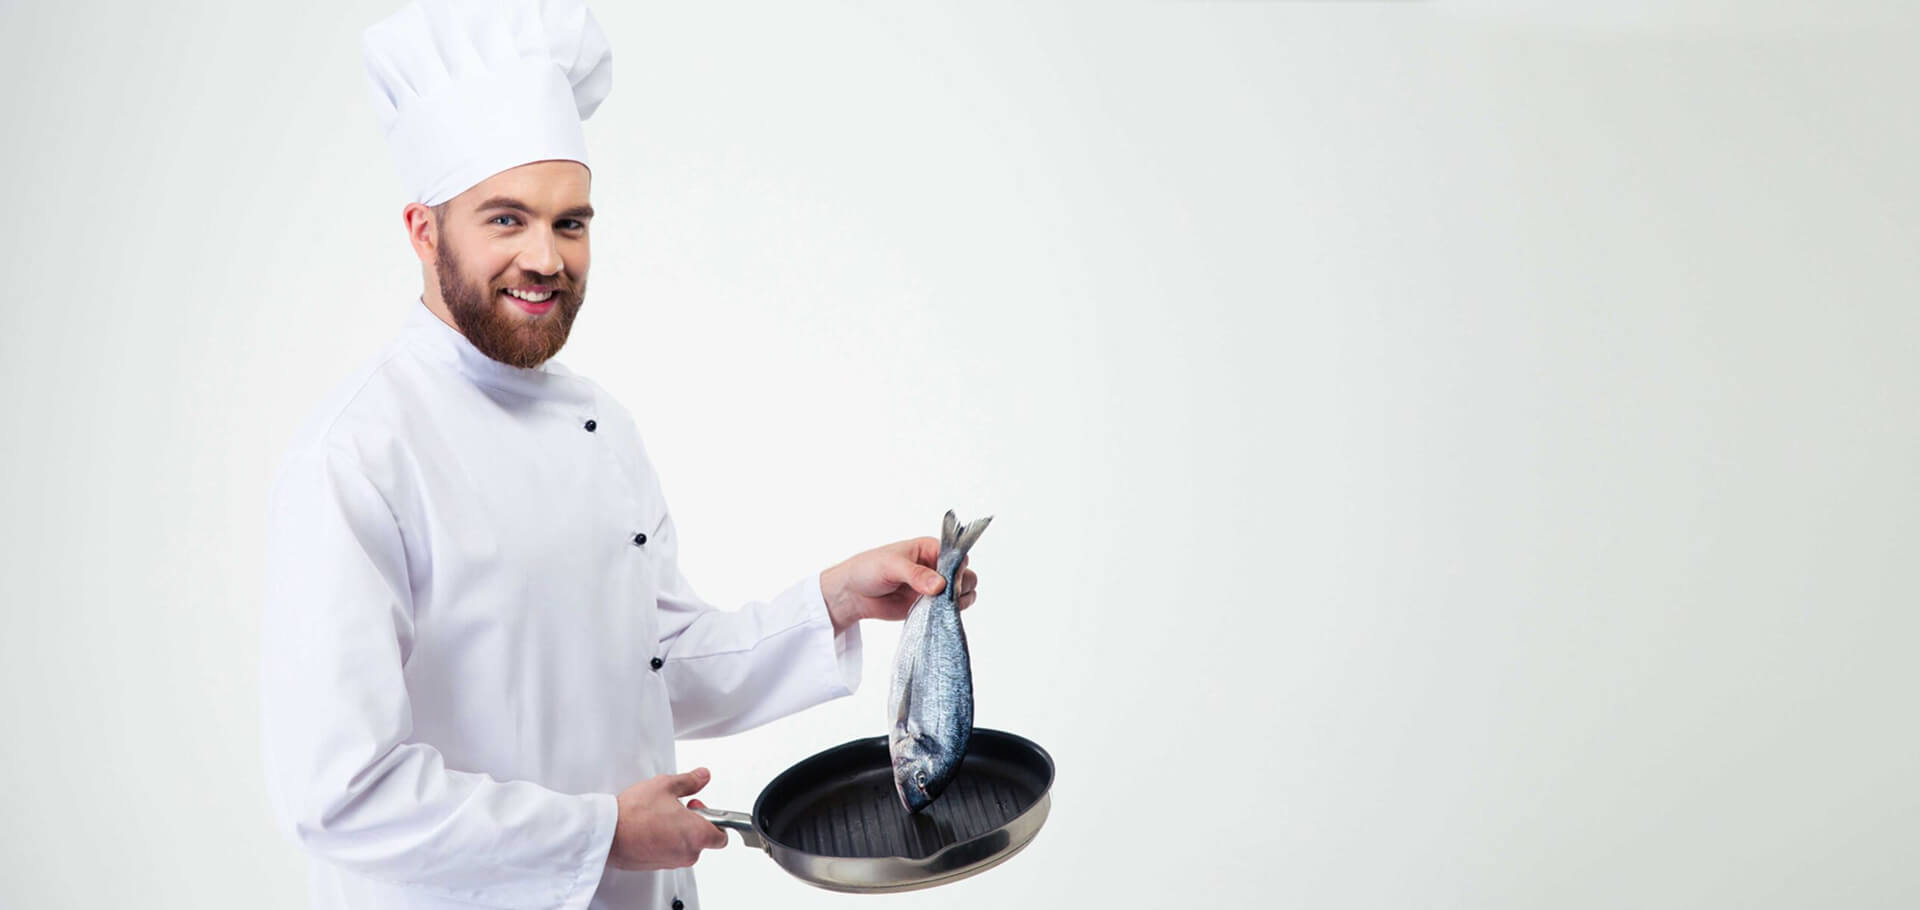 Why Considering Outsourcing as You Have Bigger Fish to Fry